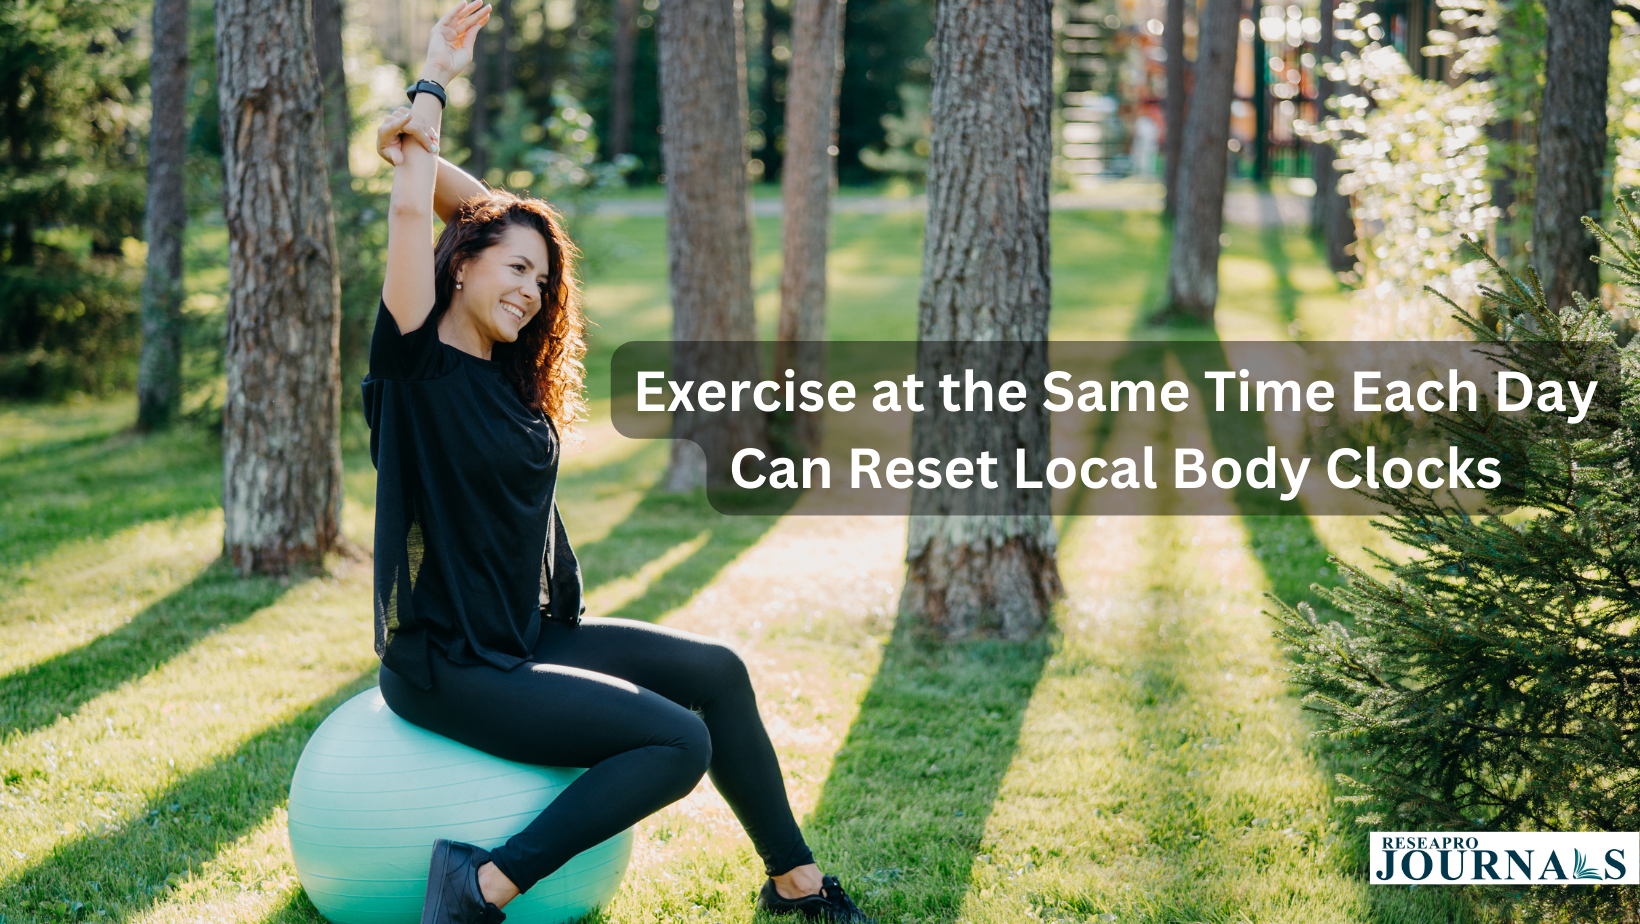 Exercise at the Same Time Each Day Can Reset Local Body Clocks